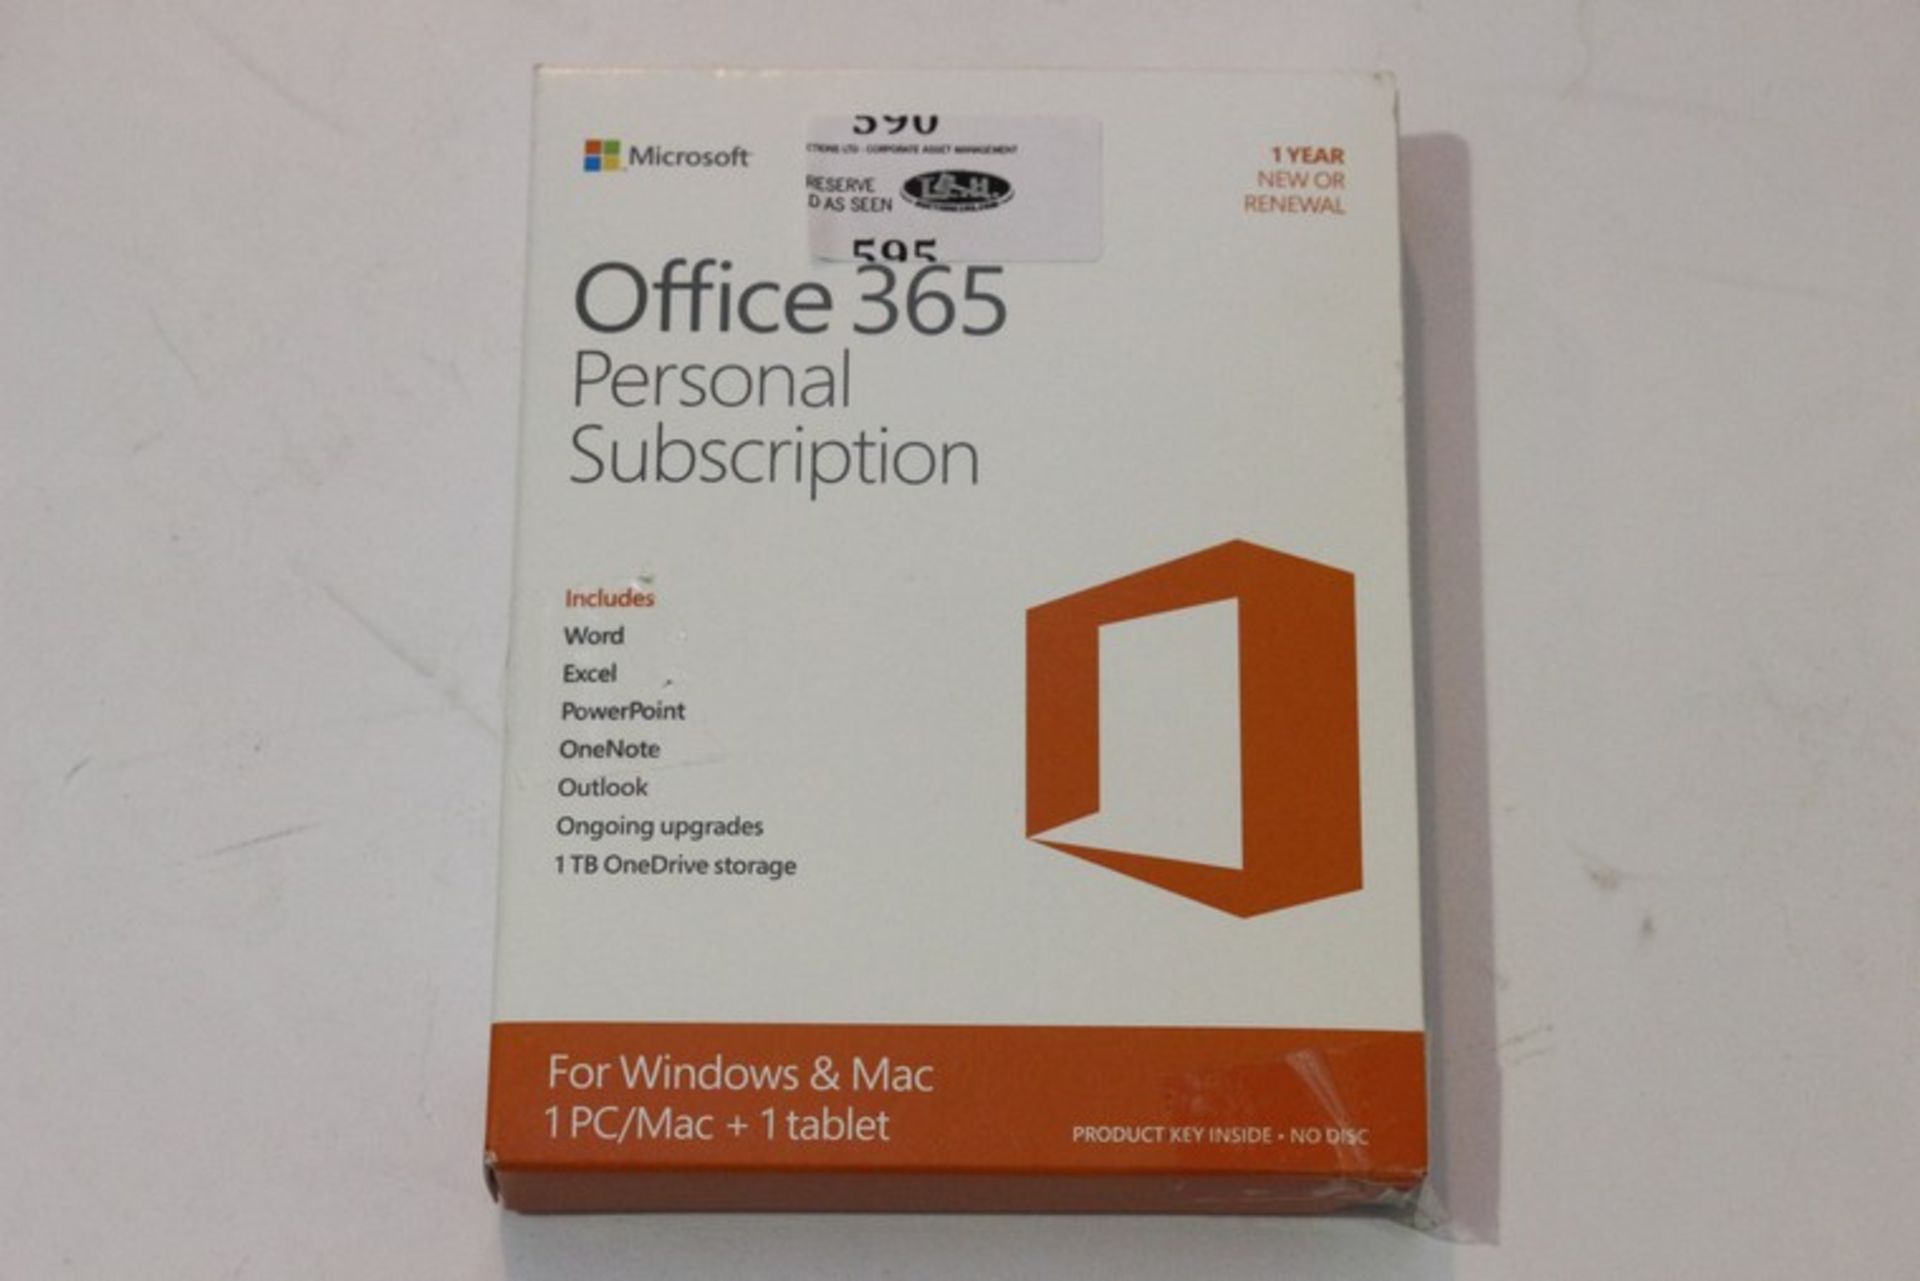 2 x BOXED MICROSOFT OFFICE 365 SOFTWEAR PACKS (22.4.16) *PLEASE NOTE THAT THE BID PRICE IS